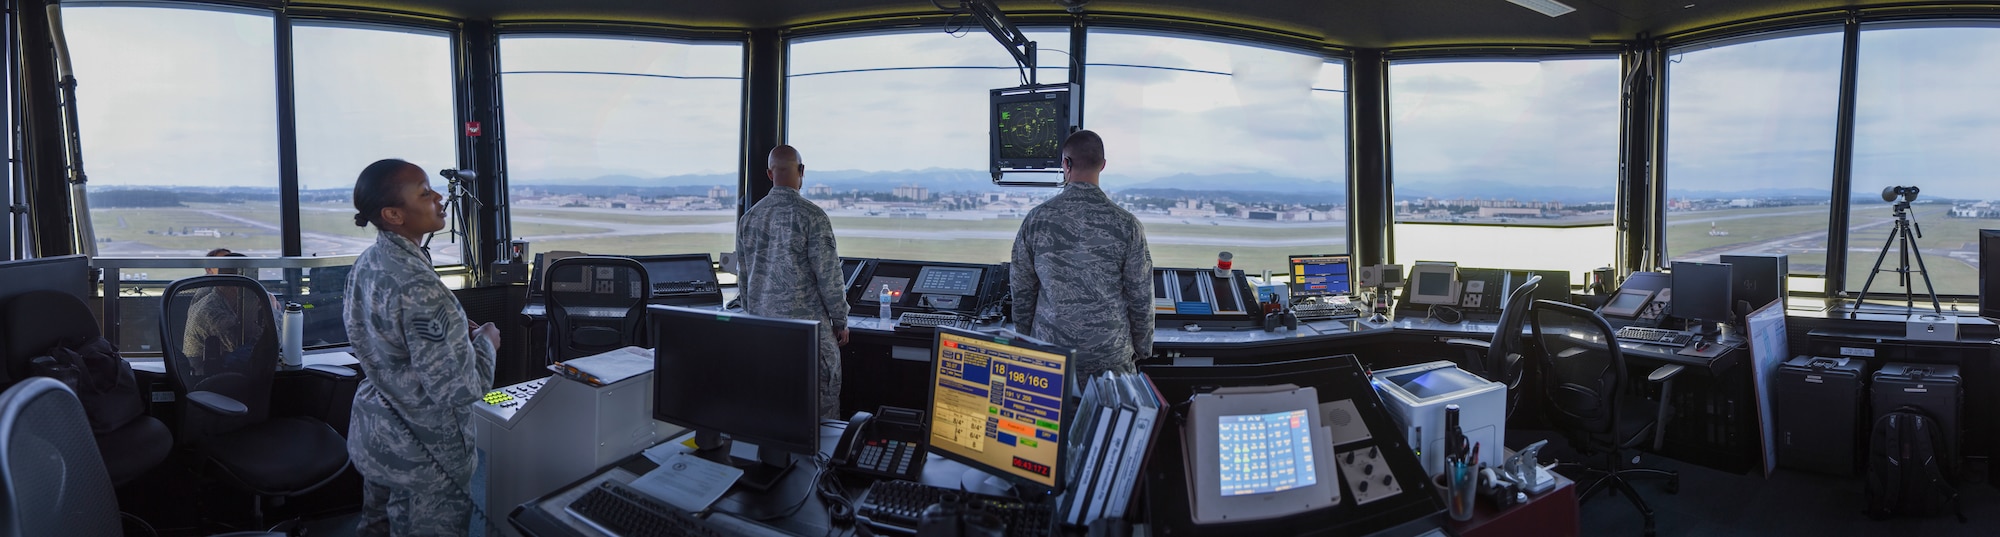 A panoramic photo shows the tower cab section of the air traffic control tower at Yokota Air Base, Japan, May 8, 2015. (U.S. Air Force photo by Senior Airman Michael Washburn/Released) 